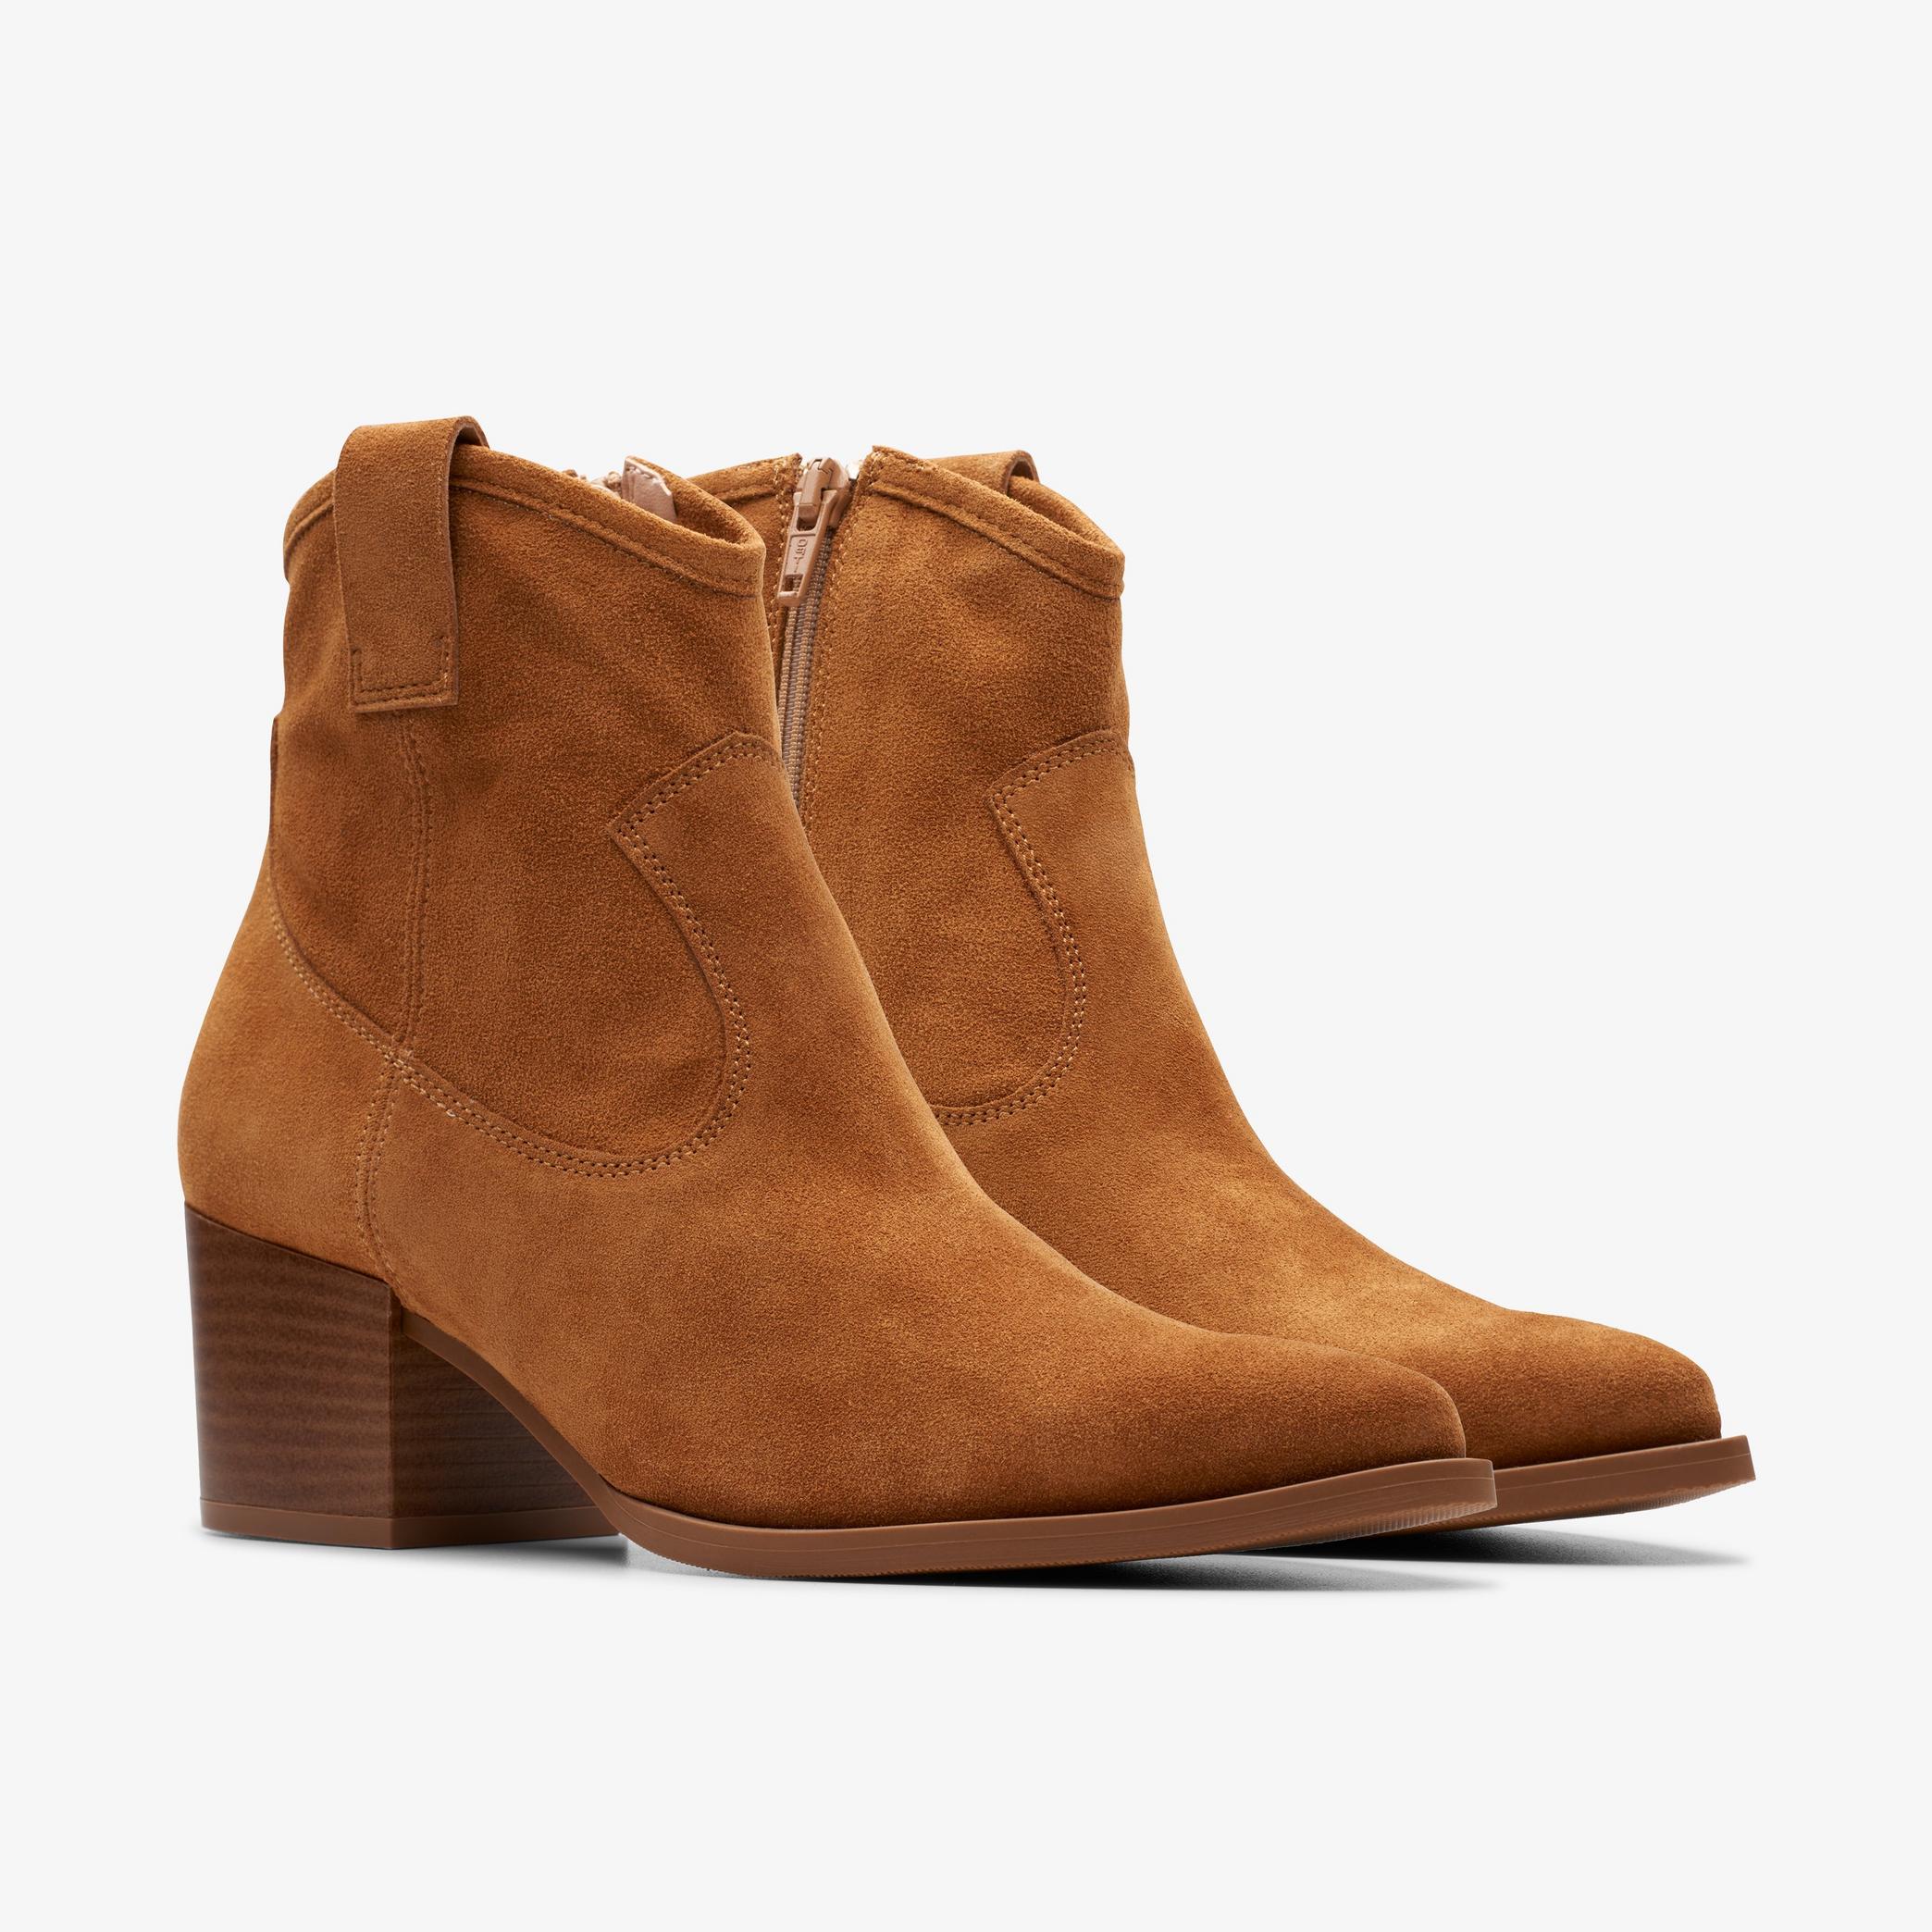 Elder Rae Tan Suede Ankle Boots, view 5 of 7